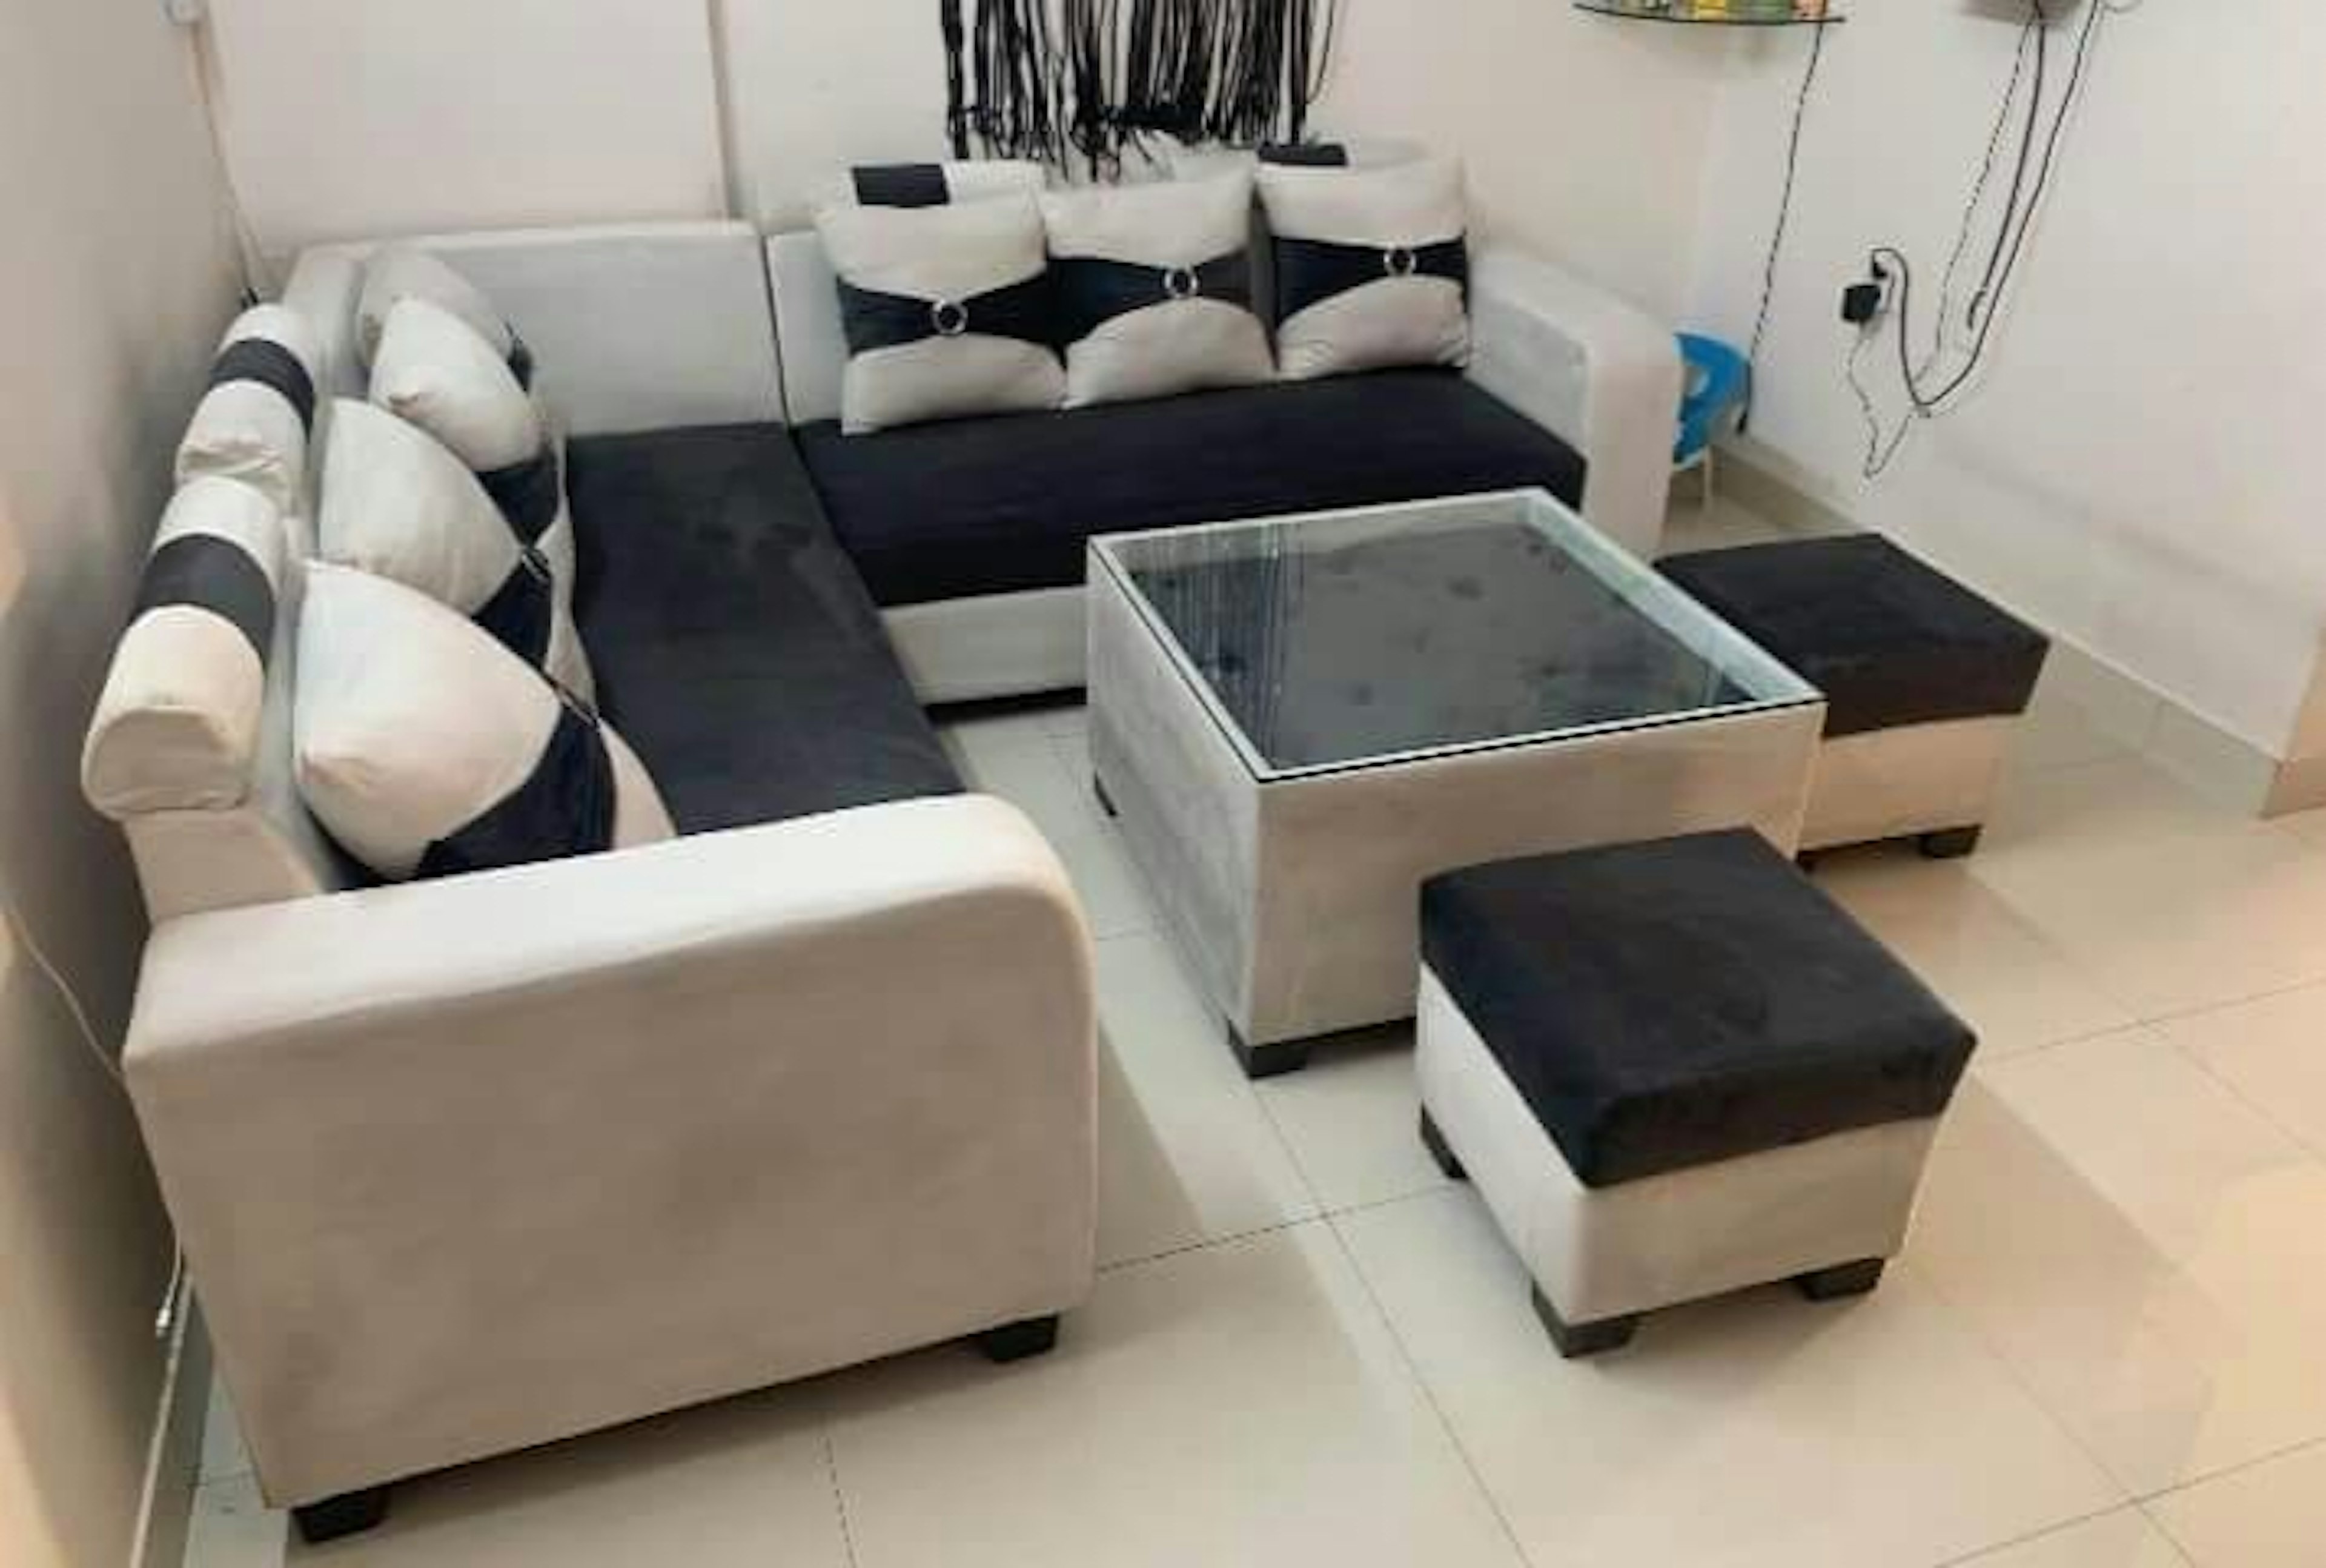 View - Sofa set photos, Sofa set available in Pune, make deal in 8000